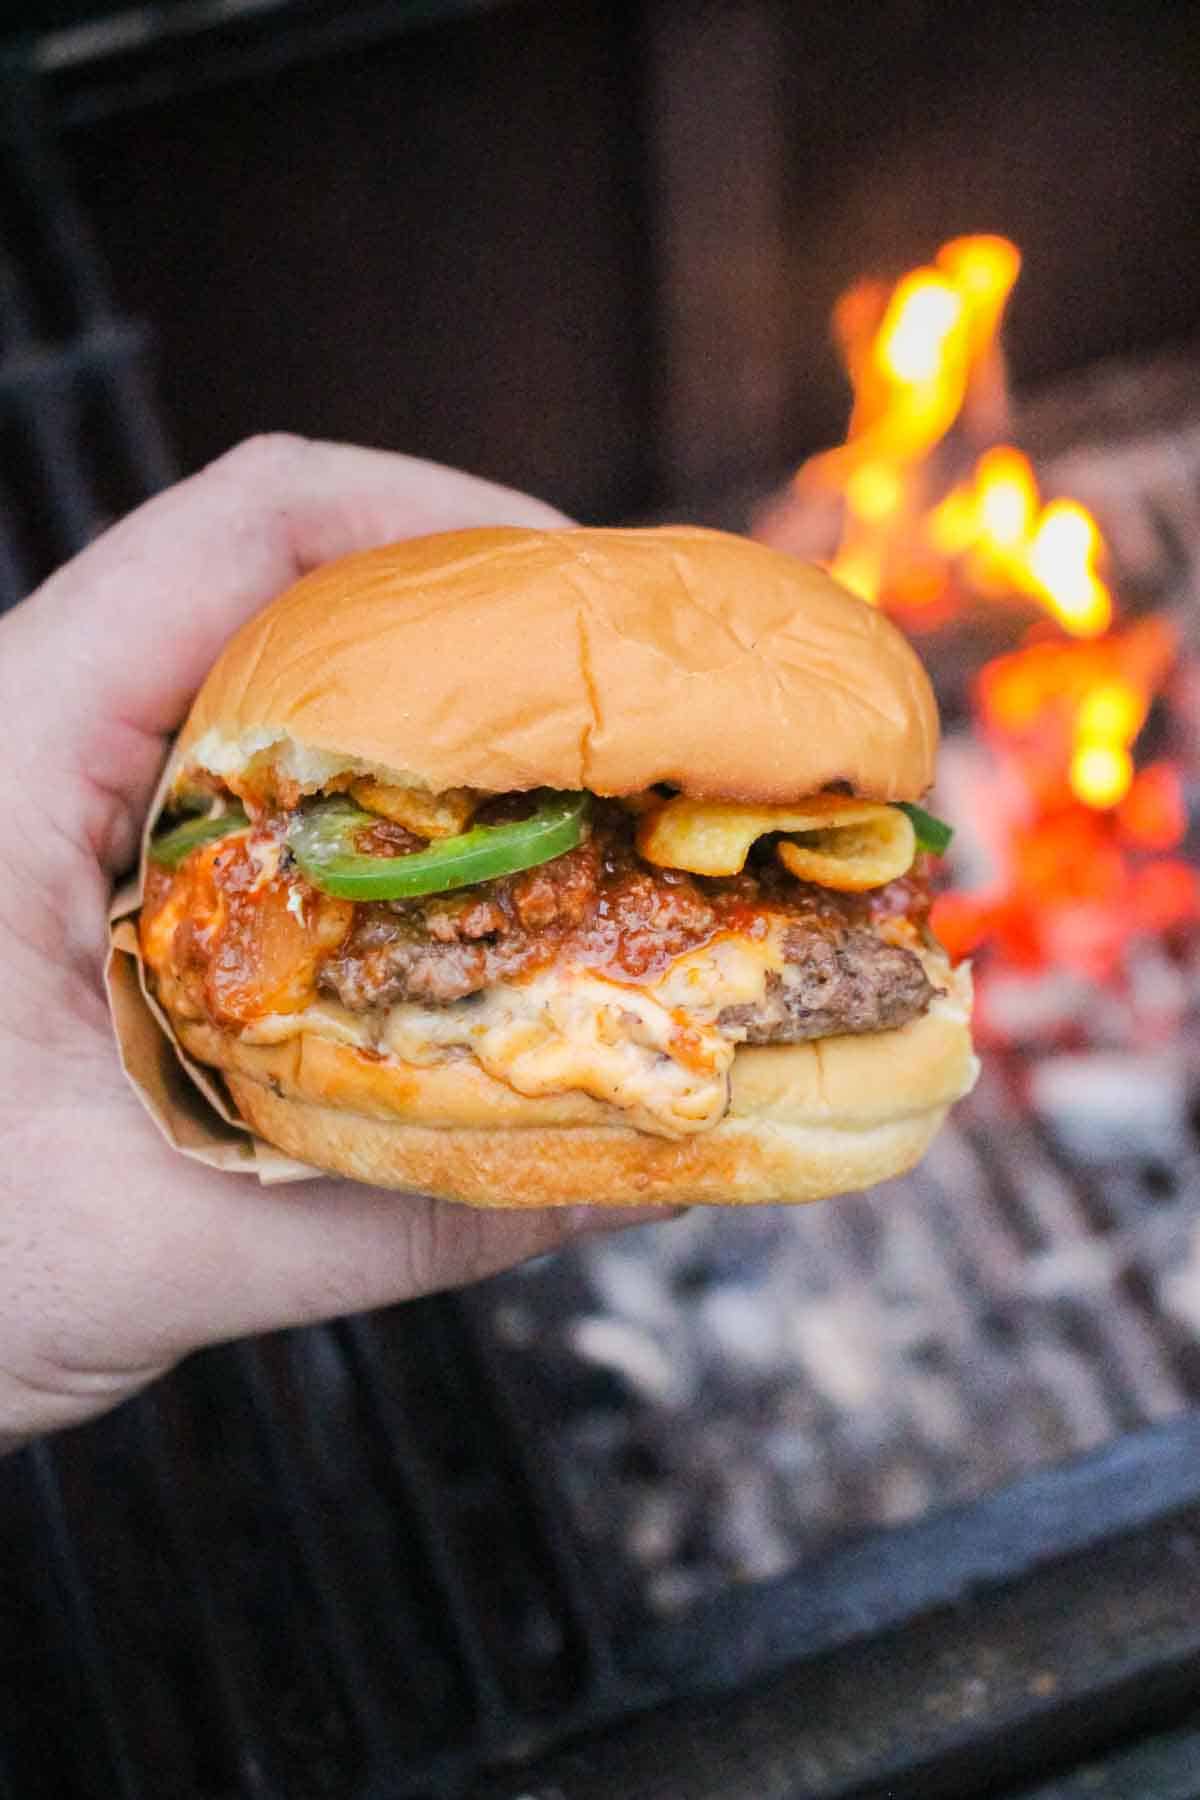 One of the burgers being held with some flames in the background.